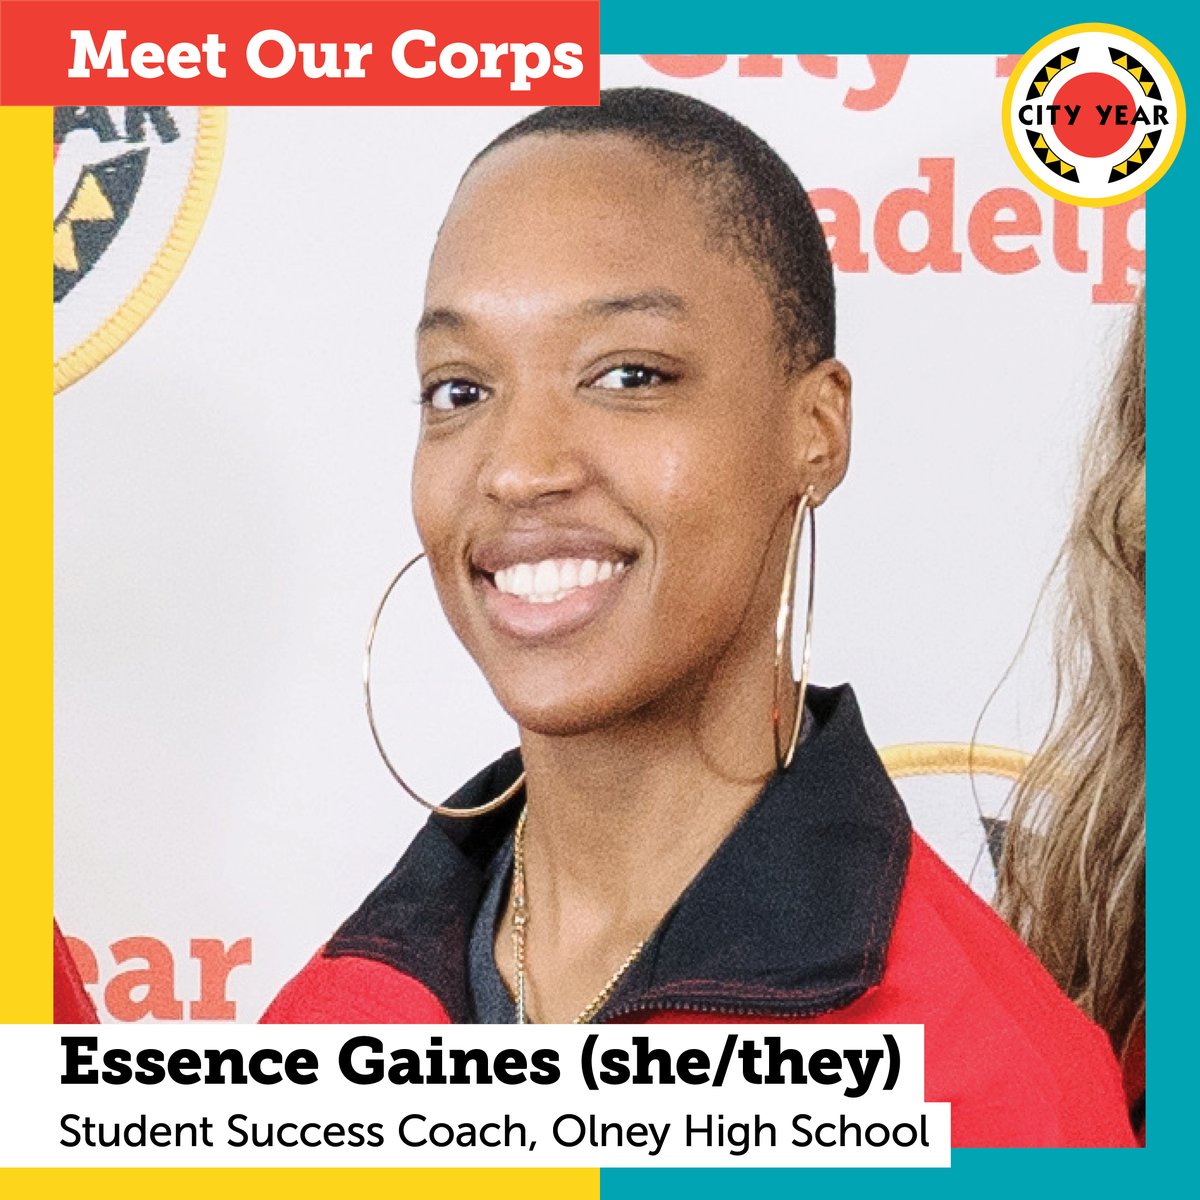 'The most rewarding part of serving with City Year is connecting with my students, whether we are completing math work or having discussions during our lunch bunch sessions. They are the reason why I love being an educator.' -Essence Gaines, serving at Olney HS #WhyIServeCYP